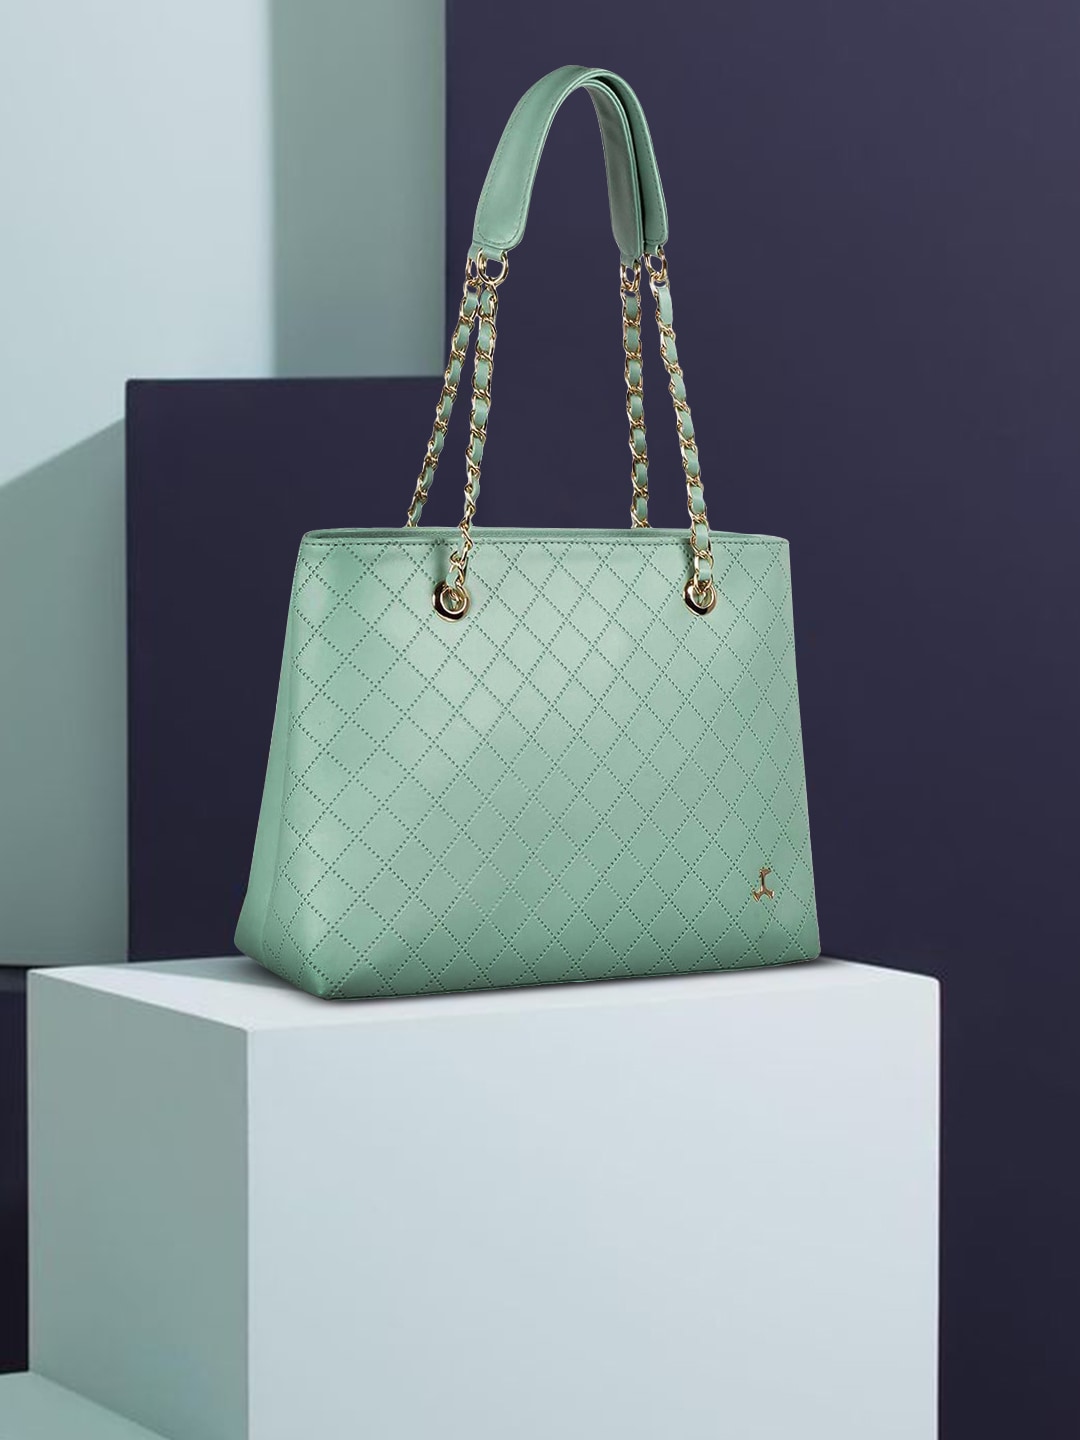 Mochi Green Textured PU Structured Shoulder Bag Price in India